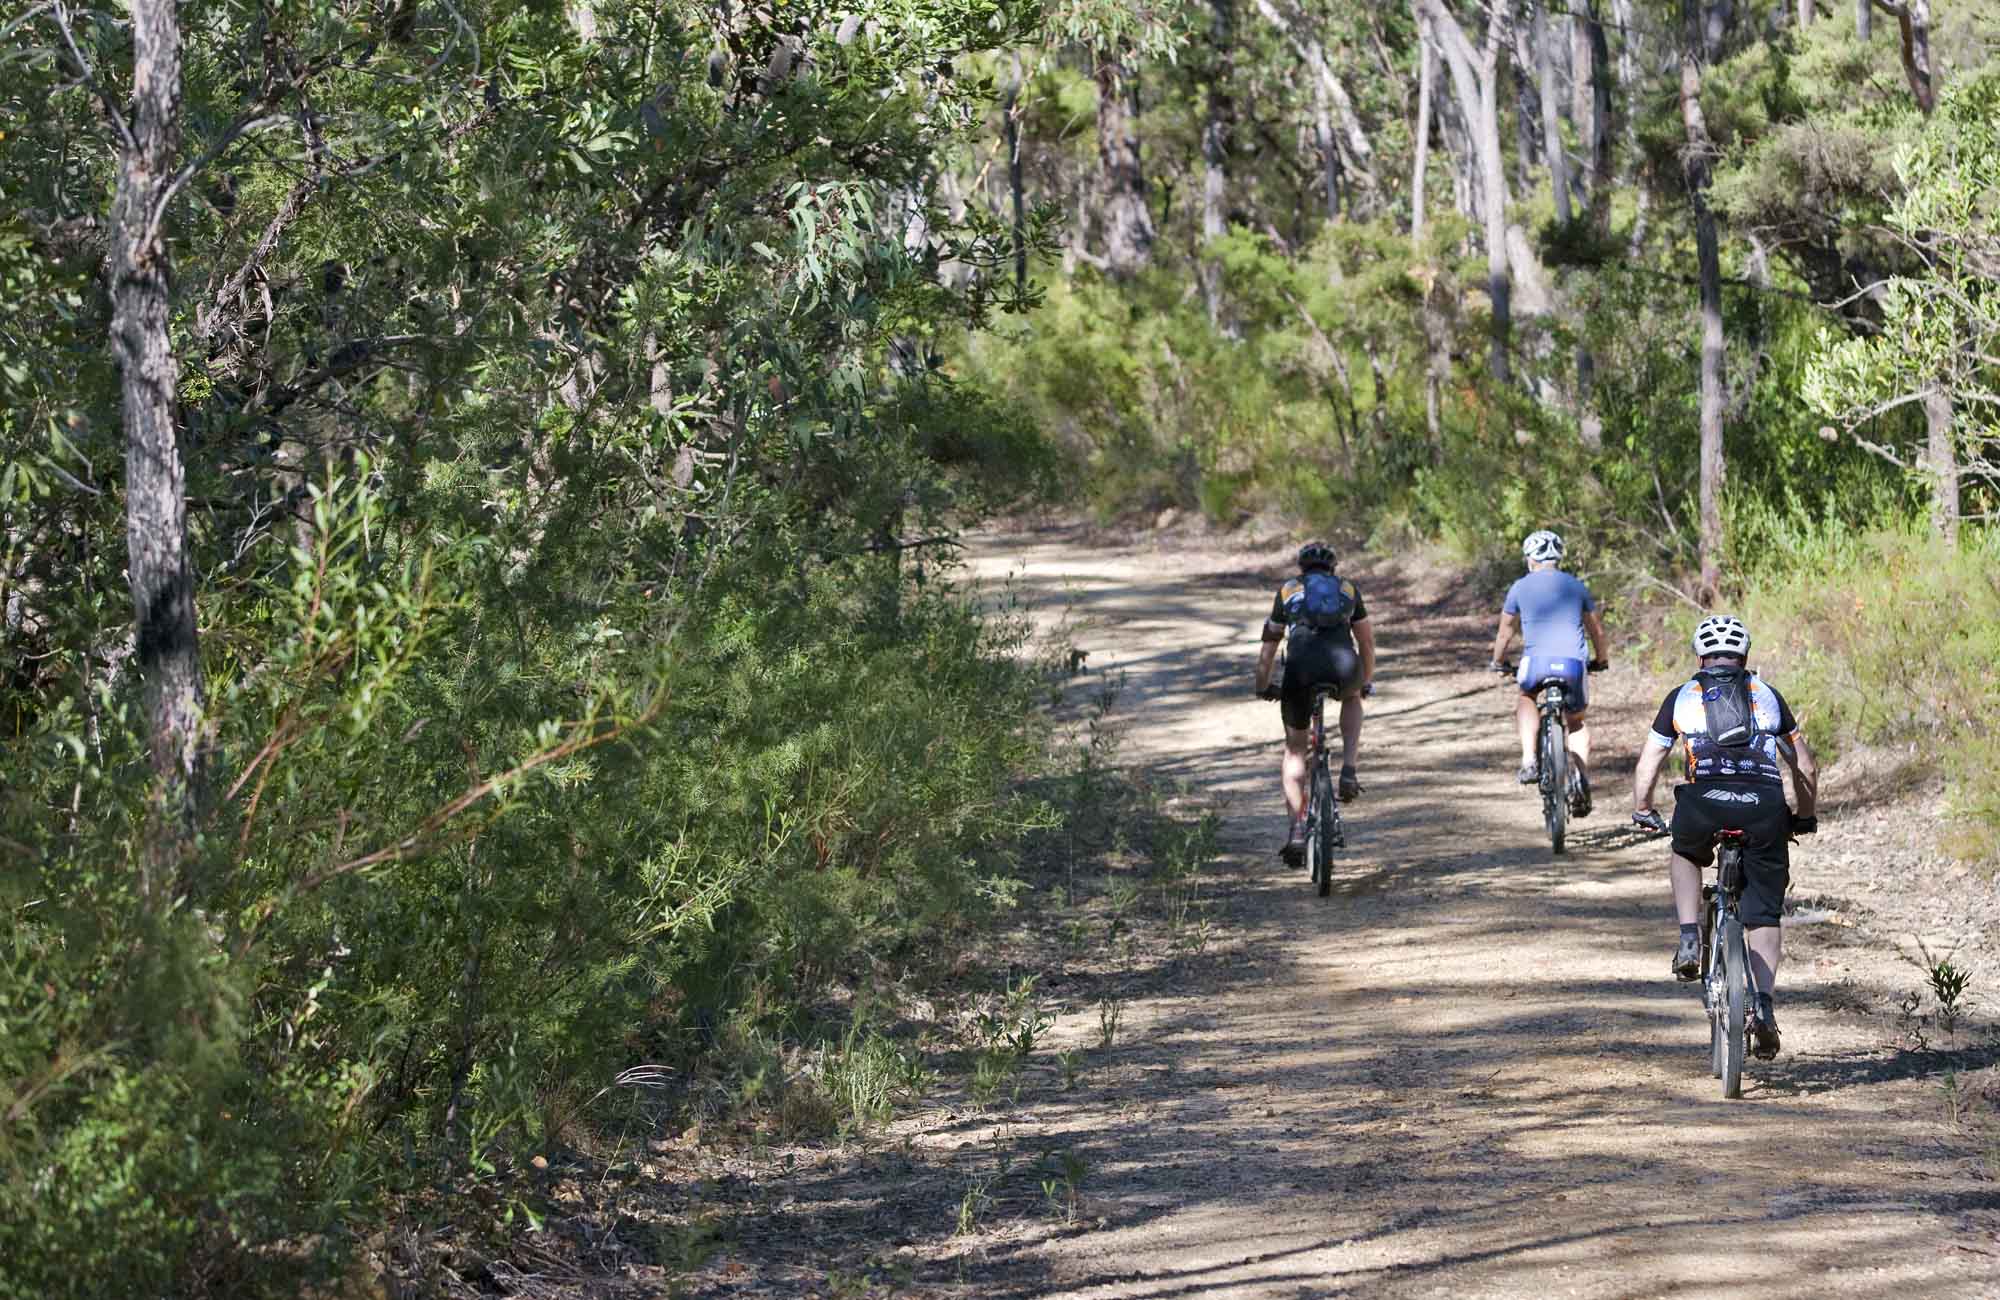 Andersons Fire Trail, Blue Mountains National Park. Photo: Nick Cubbin/NSW Government